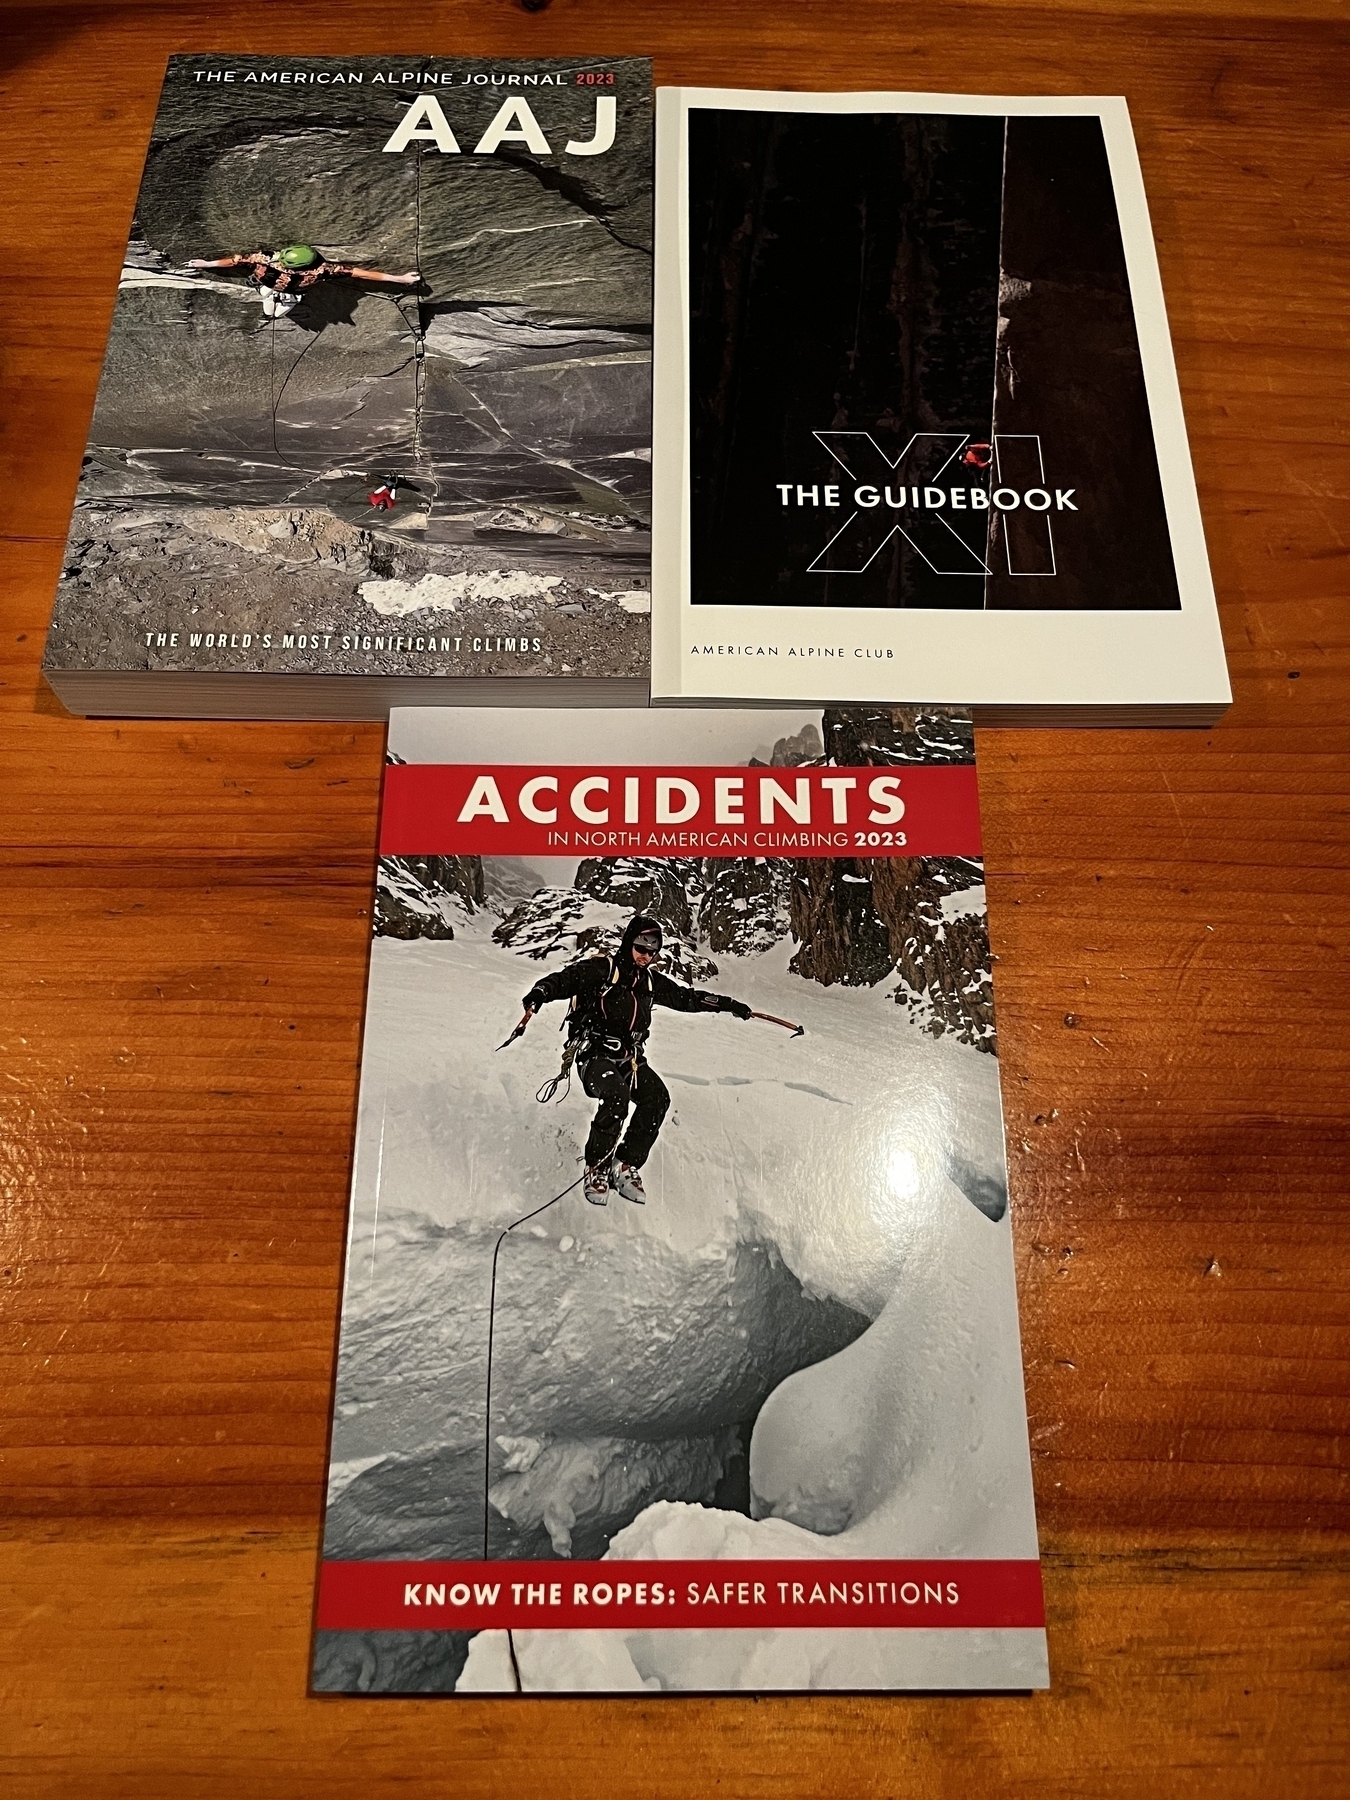 Three books on the counter, including the American Alpine Journal 2023, the guidebook number 11, and accidents in North America climbing 2023 all from the American Alpine club